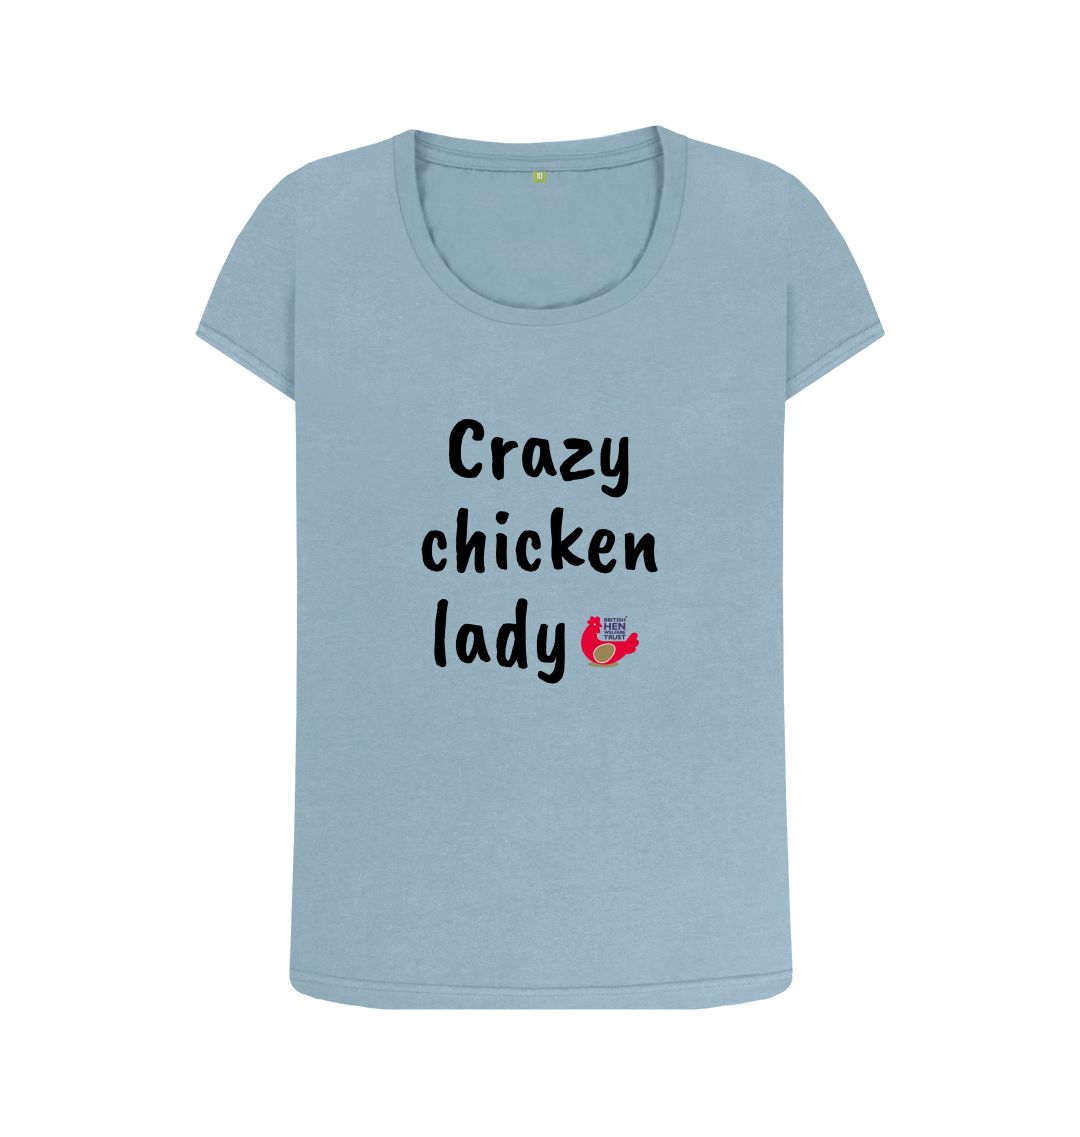 Stone Blue Crazy chicken lady Top